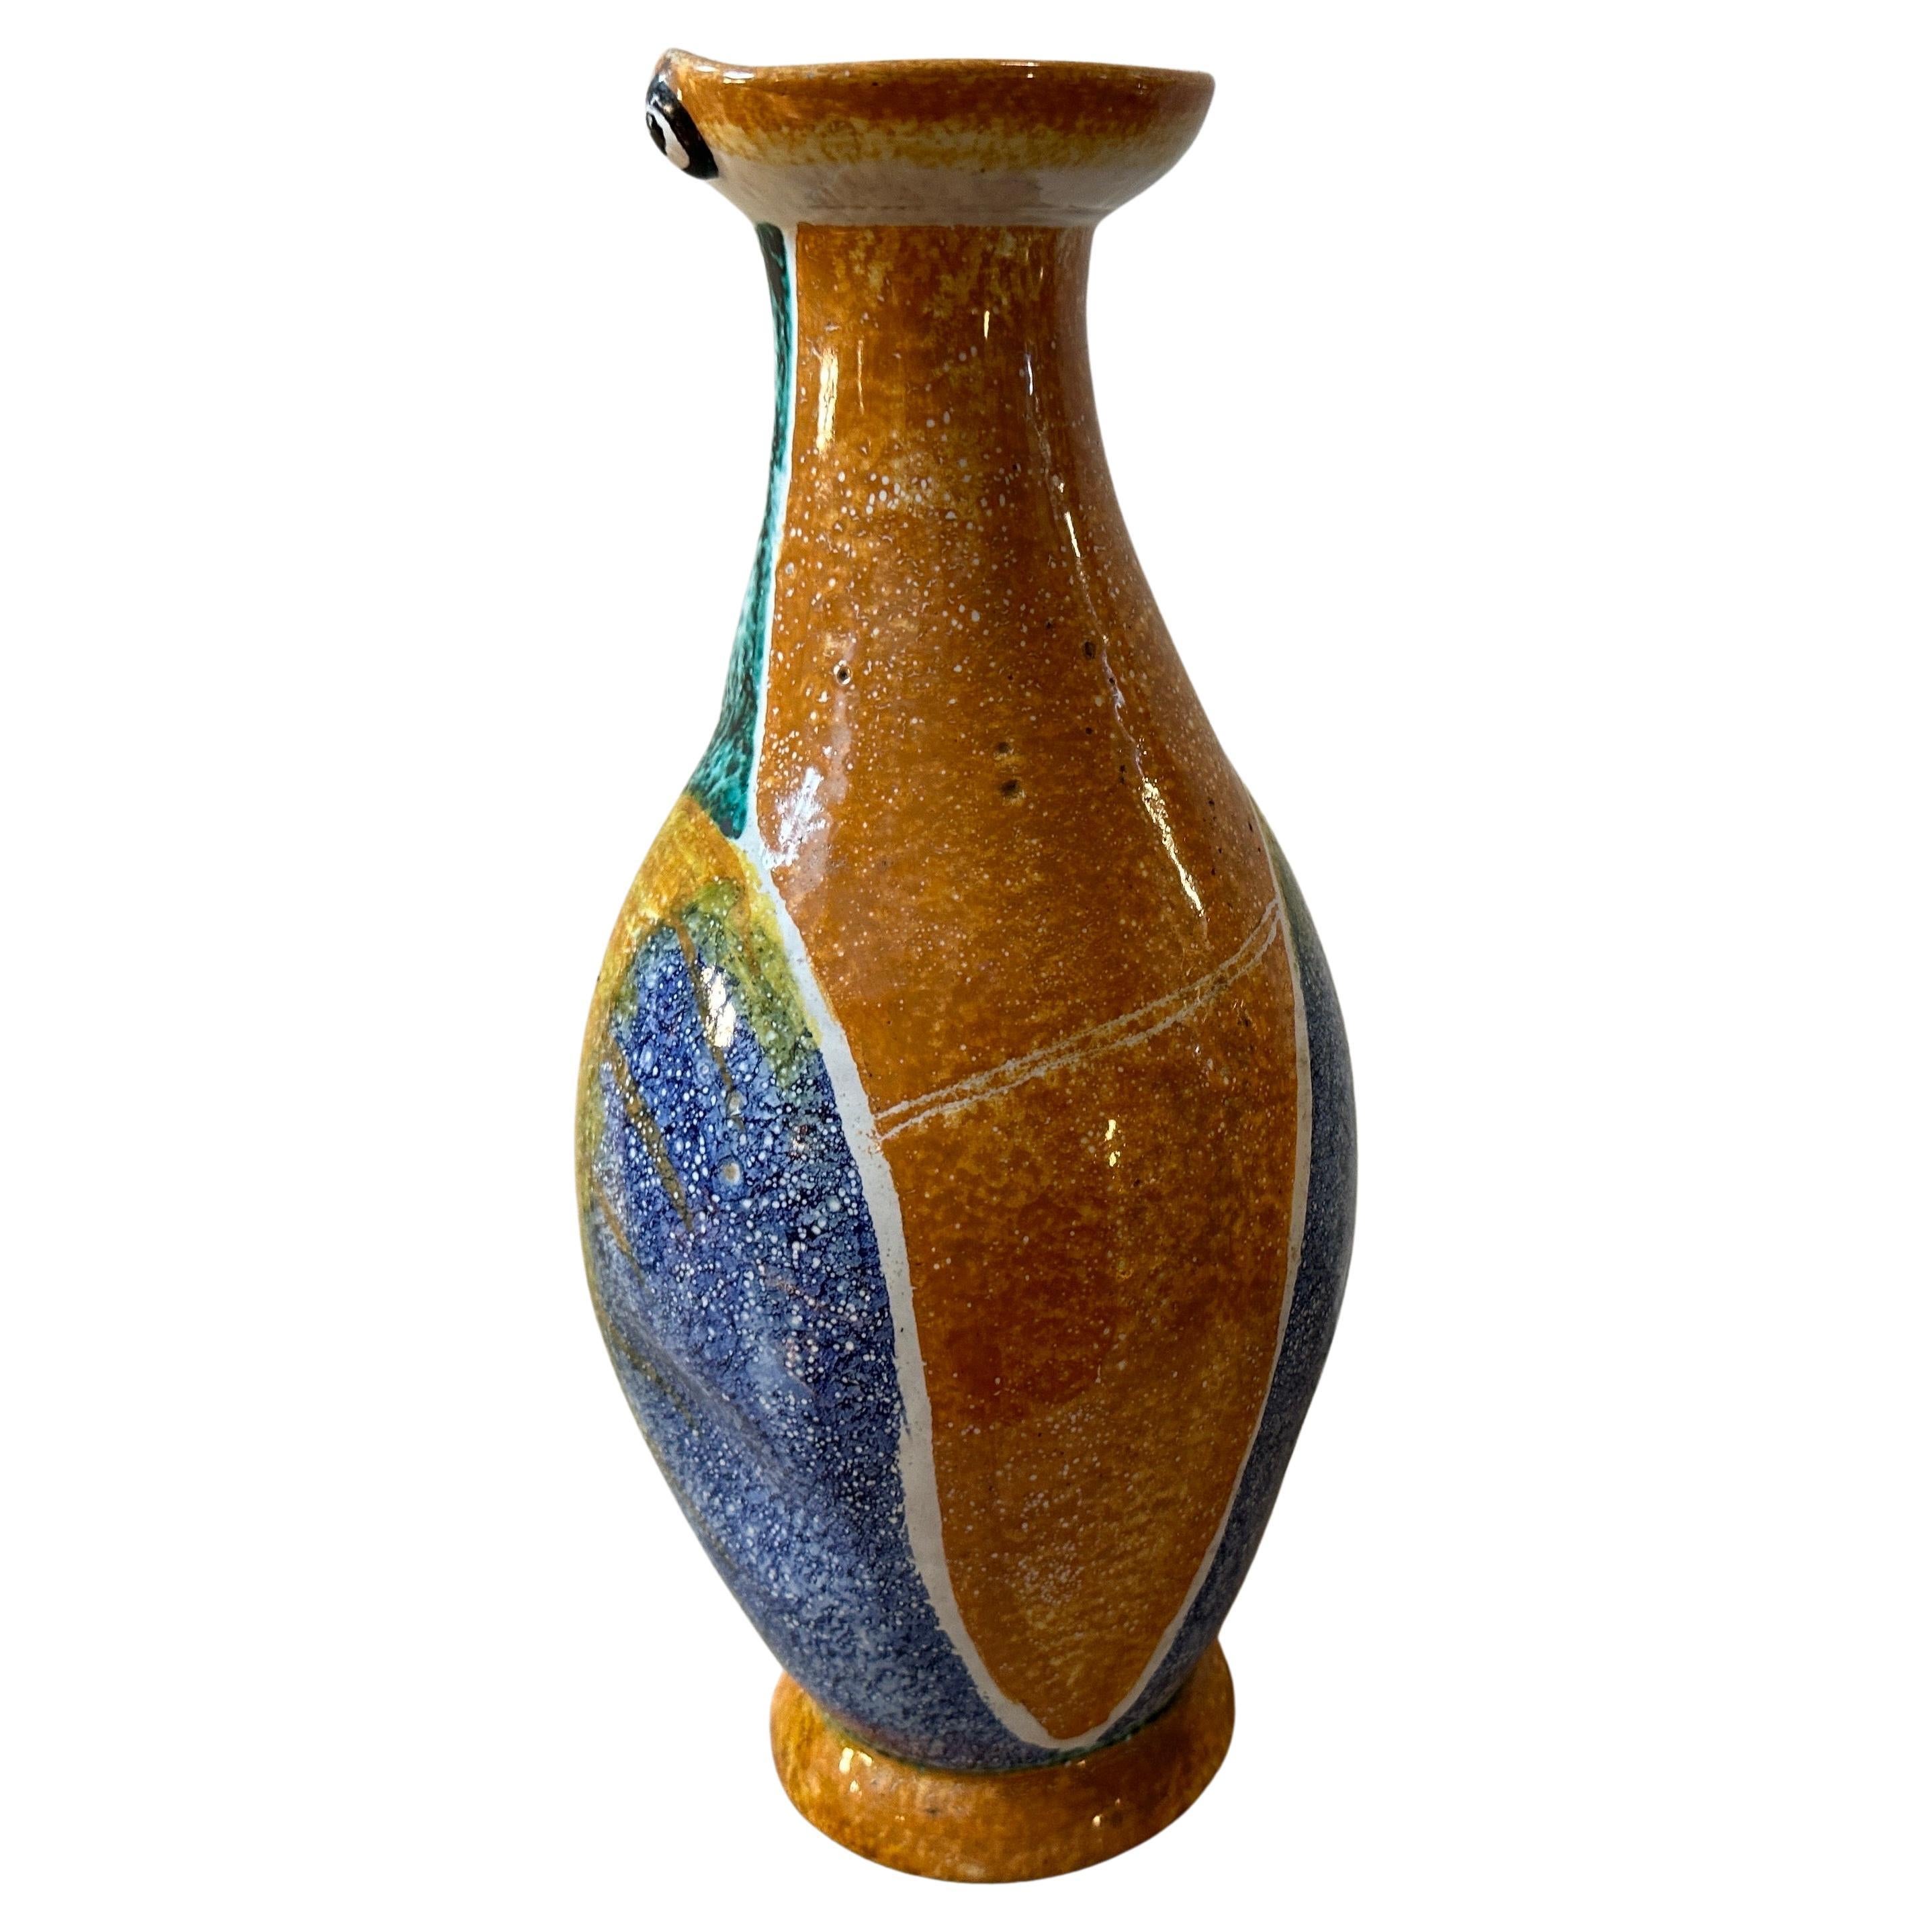 This ceramic penguin vase would be a charming and distinctive piece, reflecting the exuberant style of the Art Deco period and the craftsmanship of Albisola ceramic artisans. The vase is crafted from ceramic, a versatile material that allows for